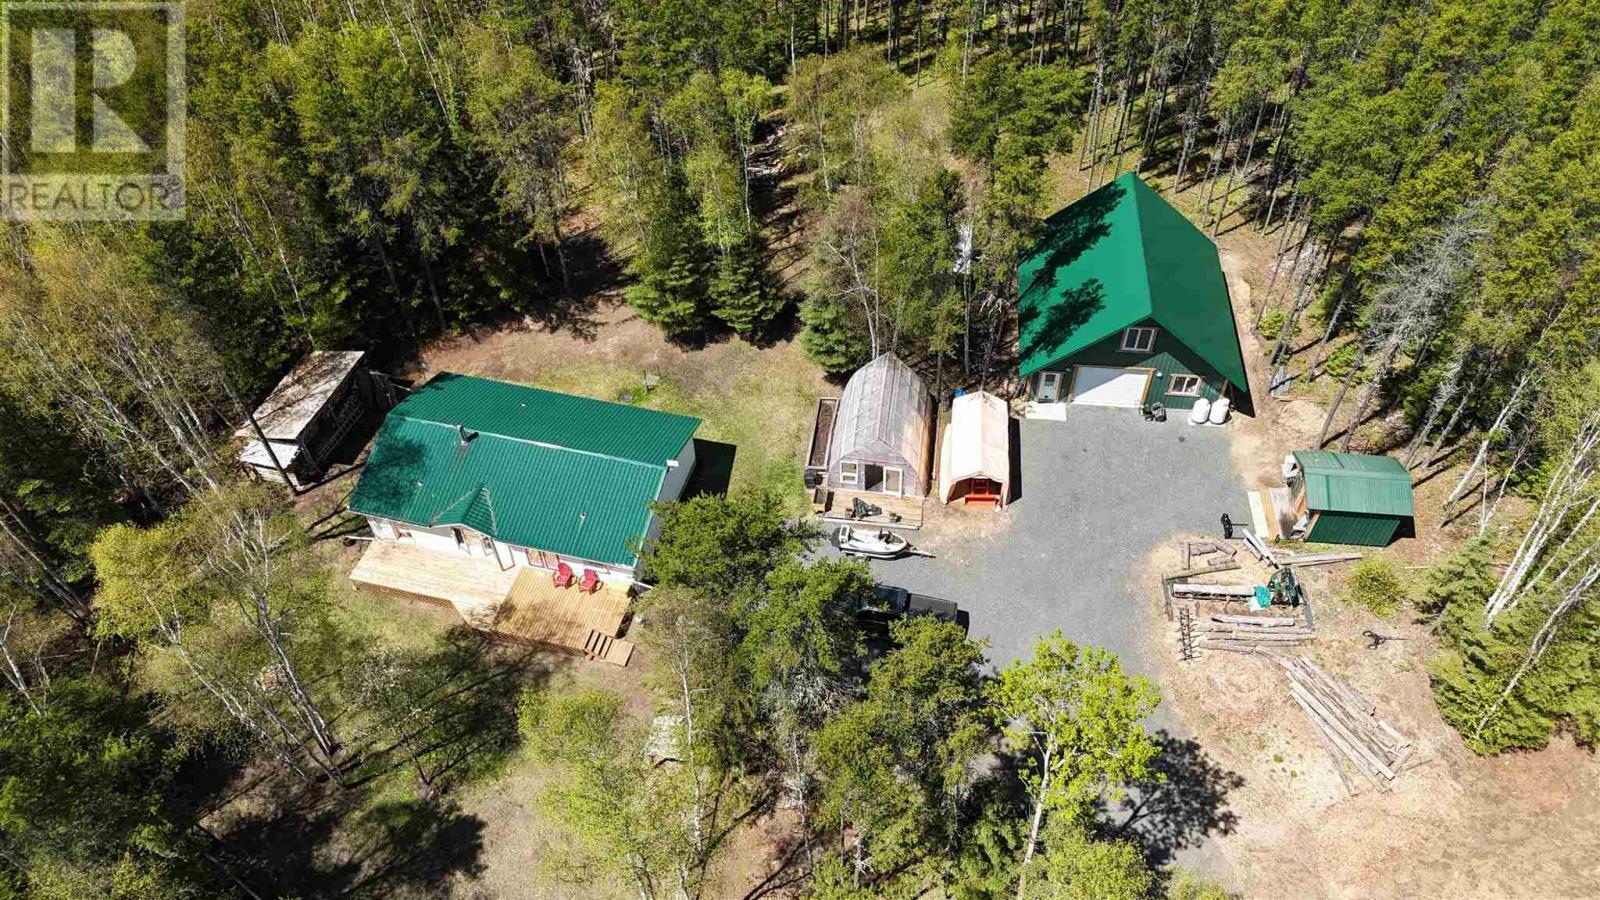 9 Whispering Pines Blvd  Sioux Lookout ON P8T 1L5 photo